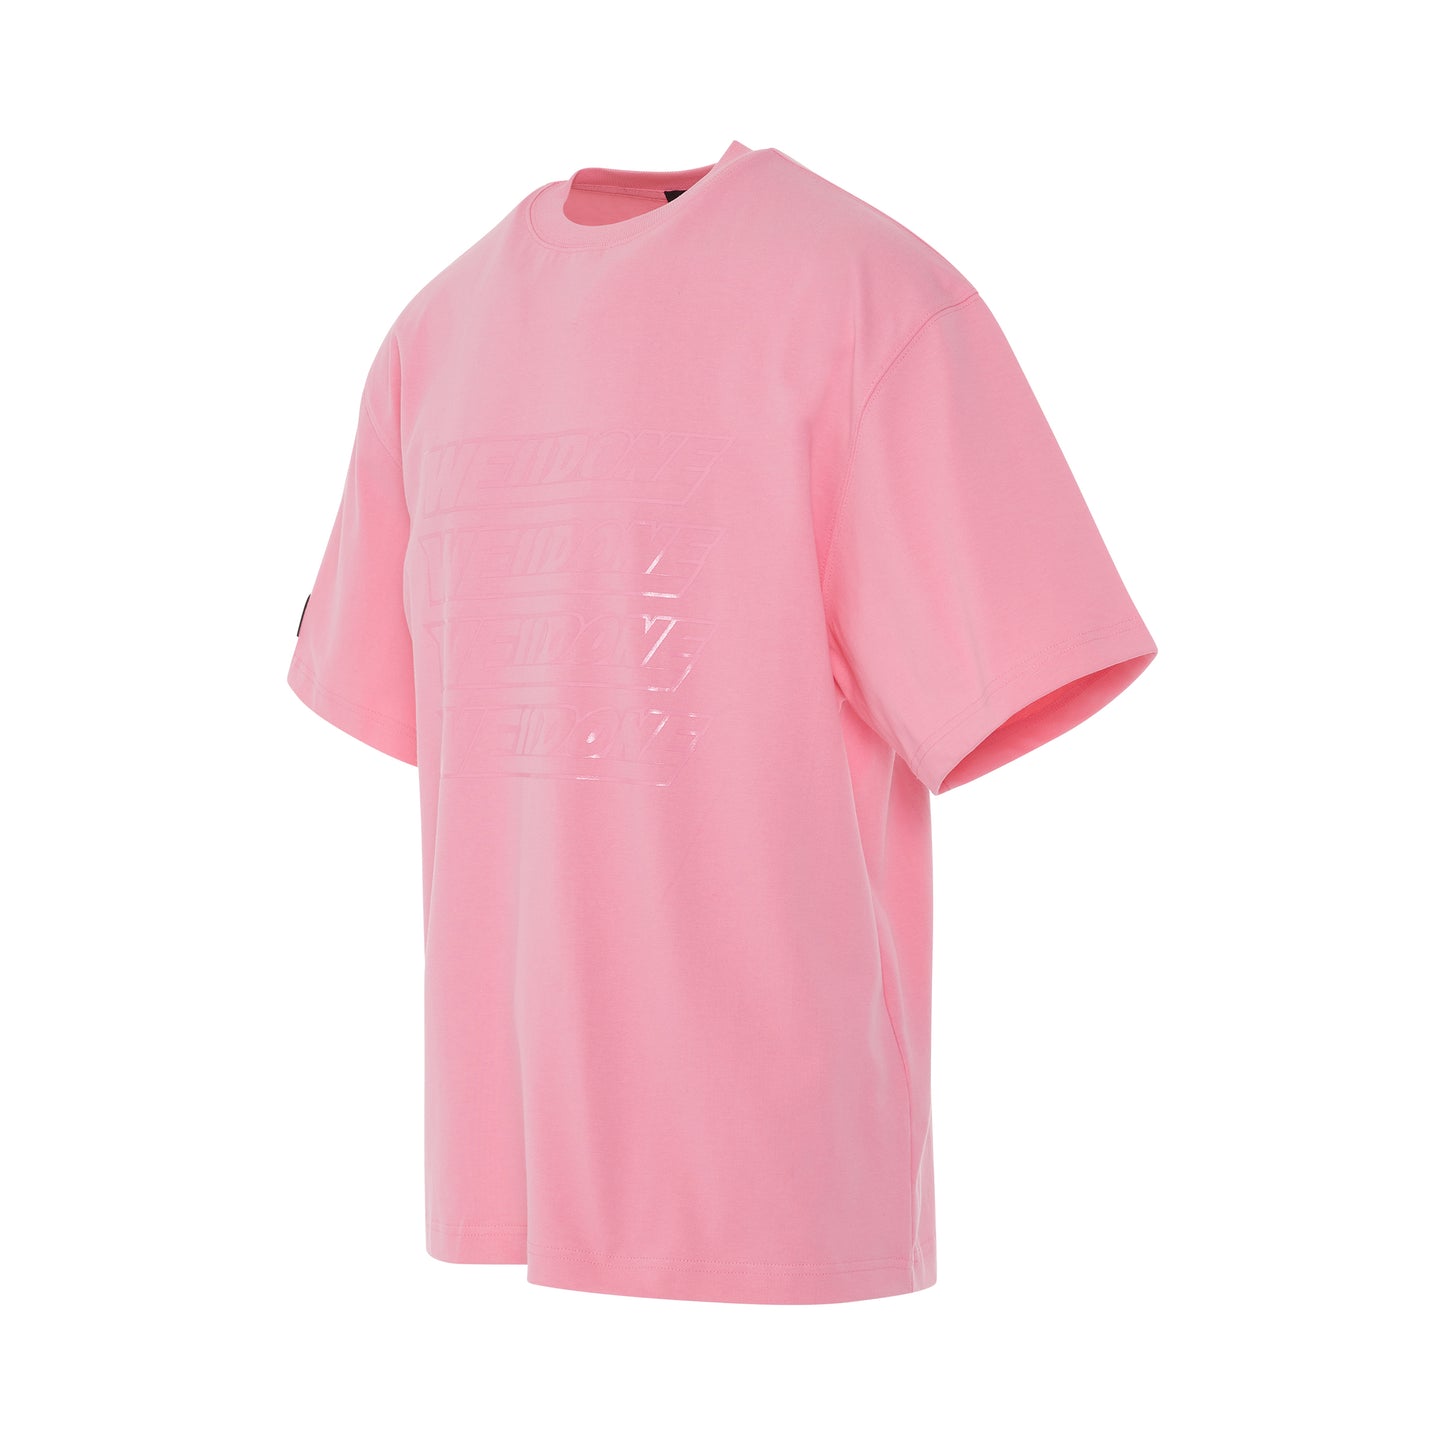 Simple Front T-Shirt in Pink